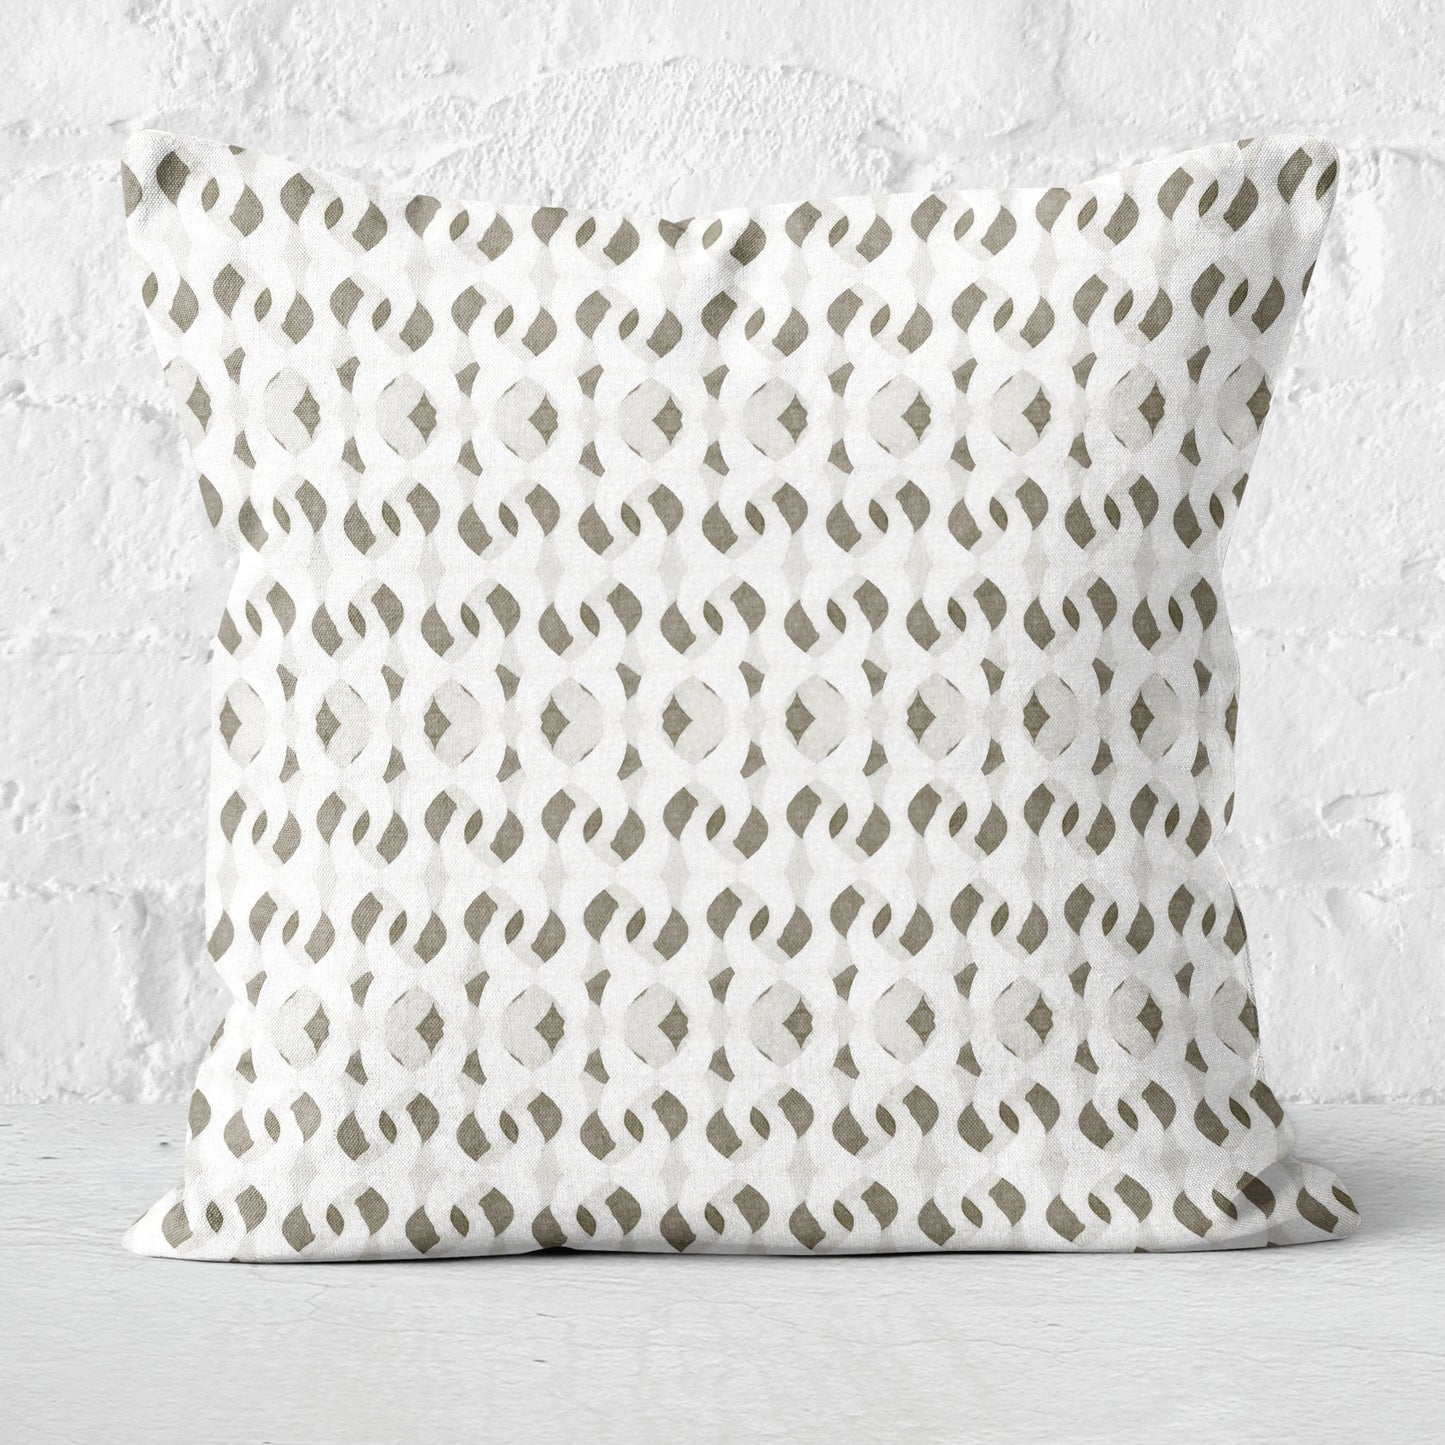 Square throw pillow featuring a painterly abstract pattern in off-white, tan, and gray. Set against a white brick wall.